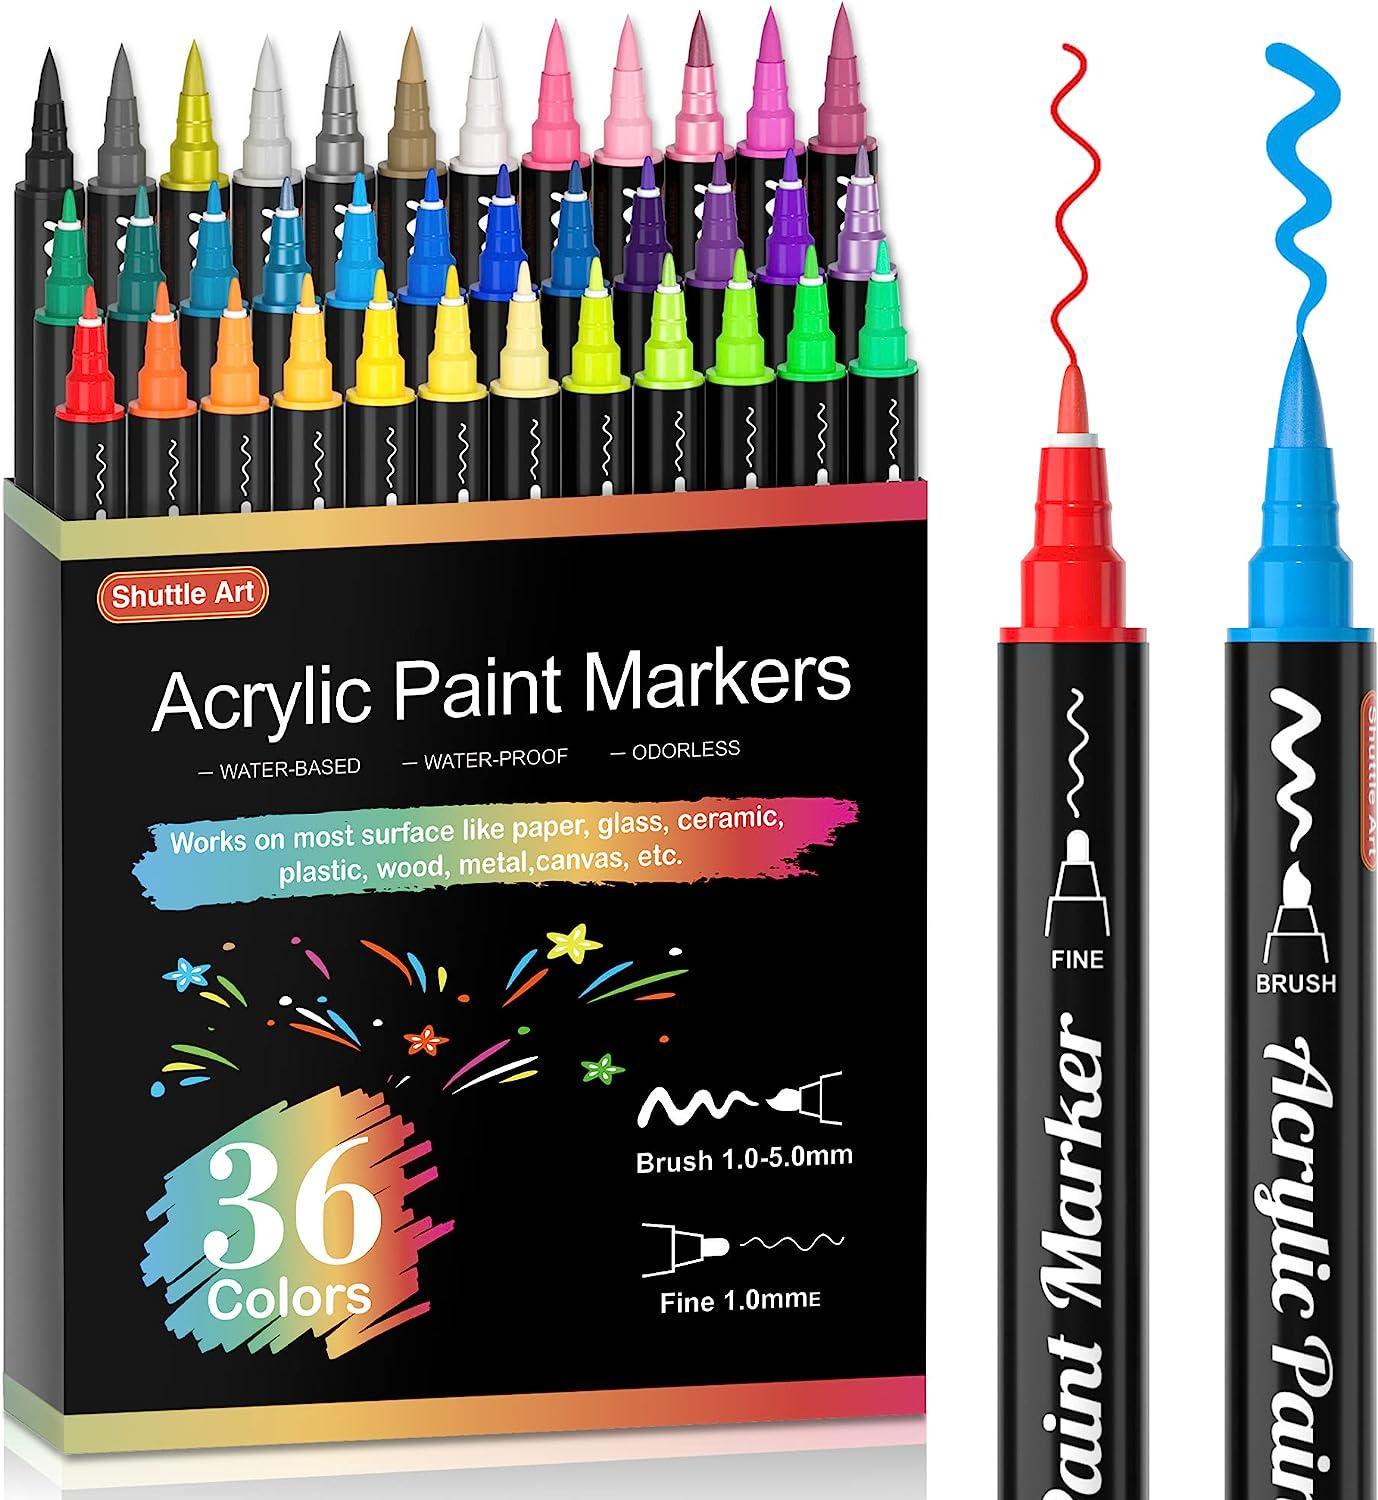 Memoffice 80 Colors Dual Tips Alcohol Markers, Art Markers Set for